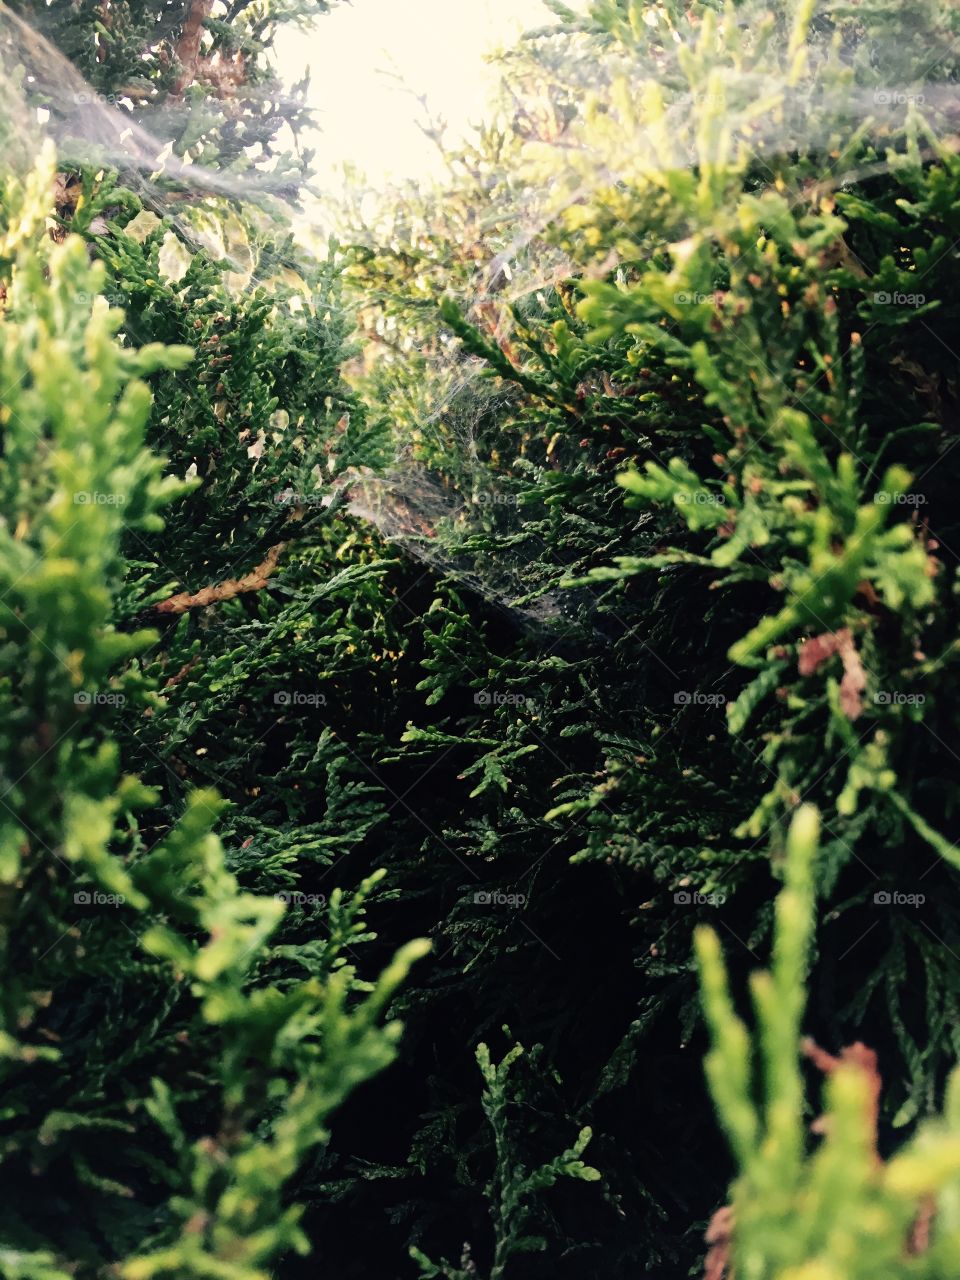 Tree with spider web